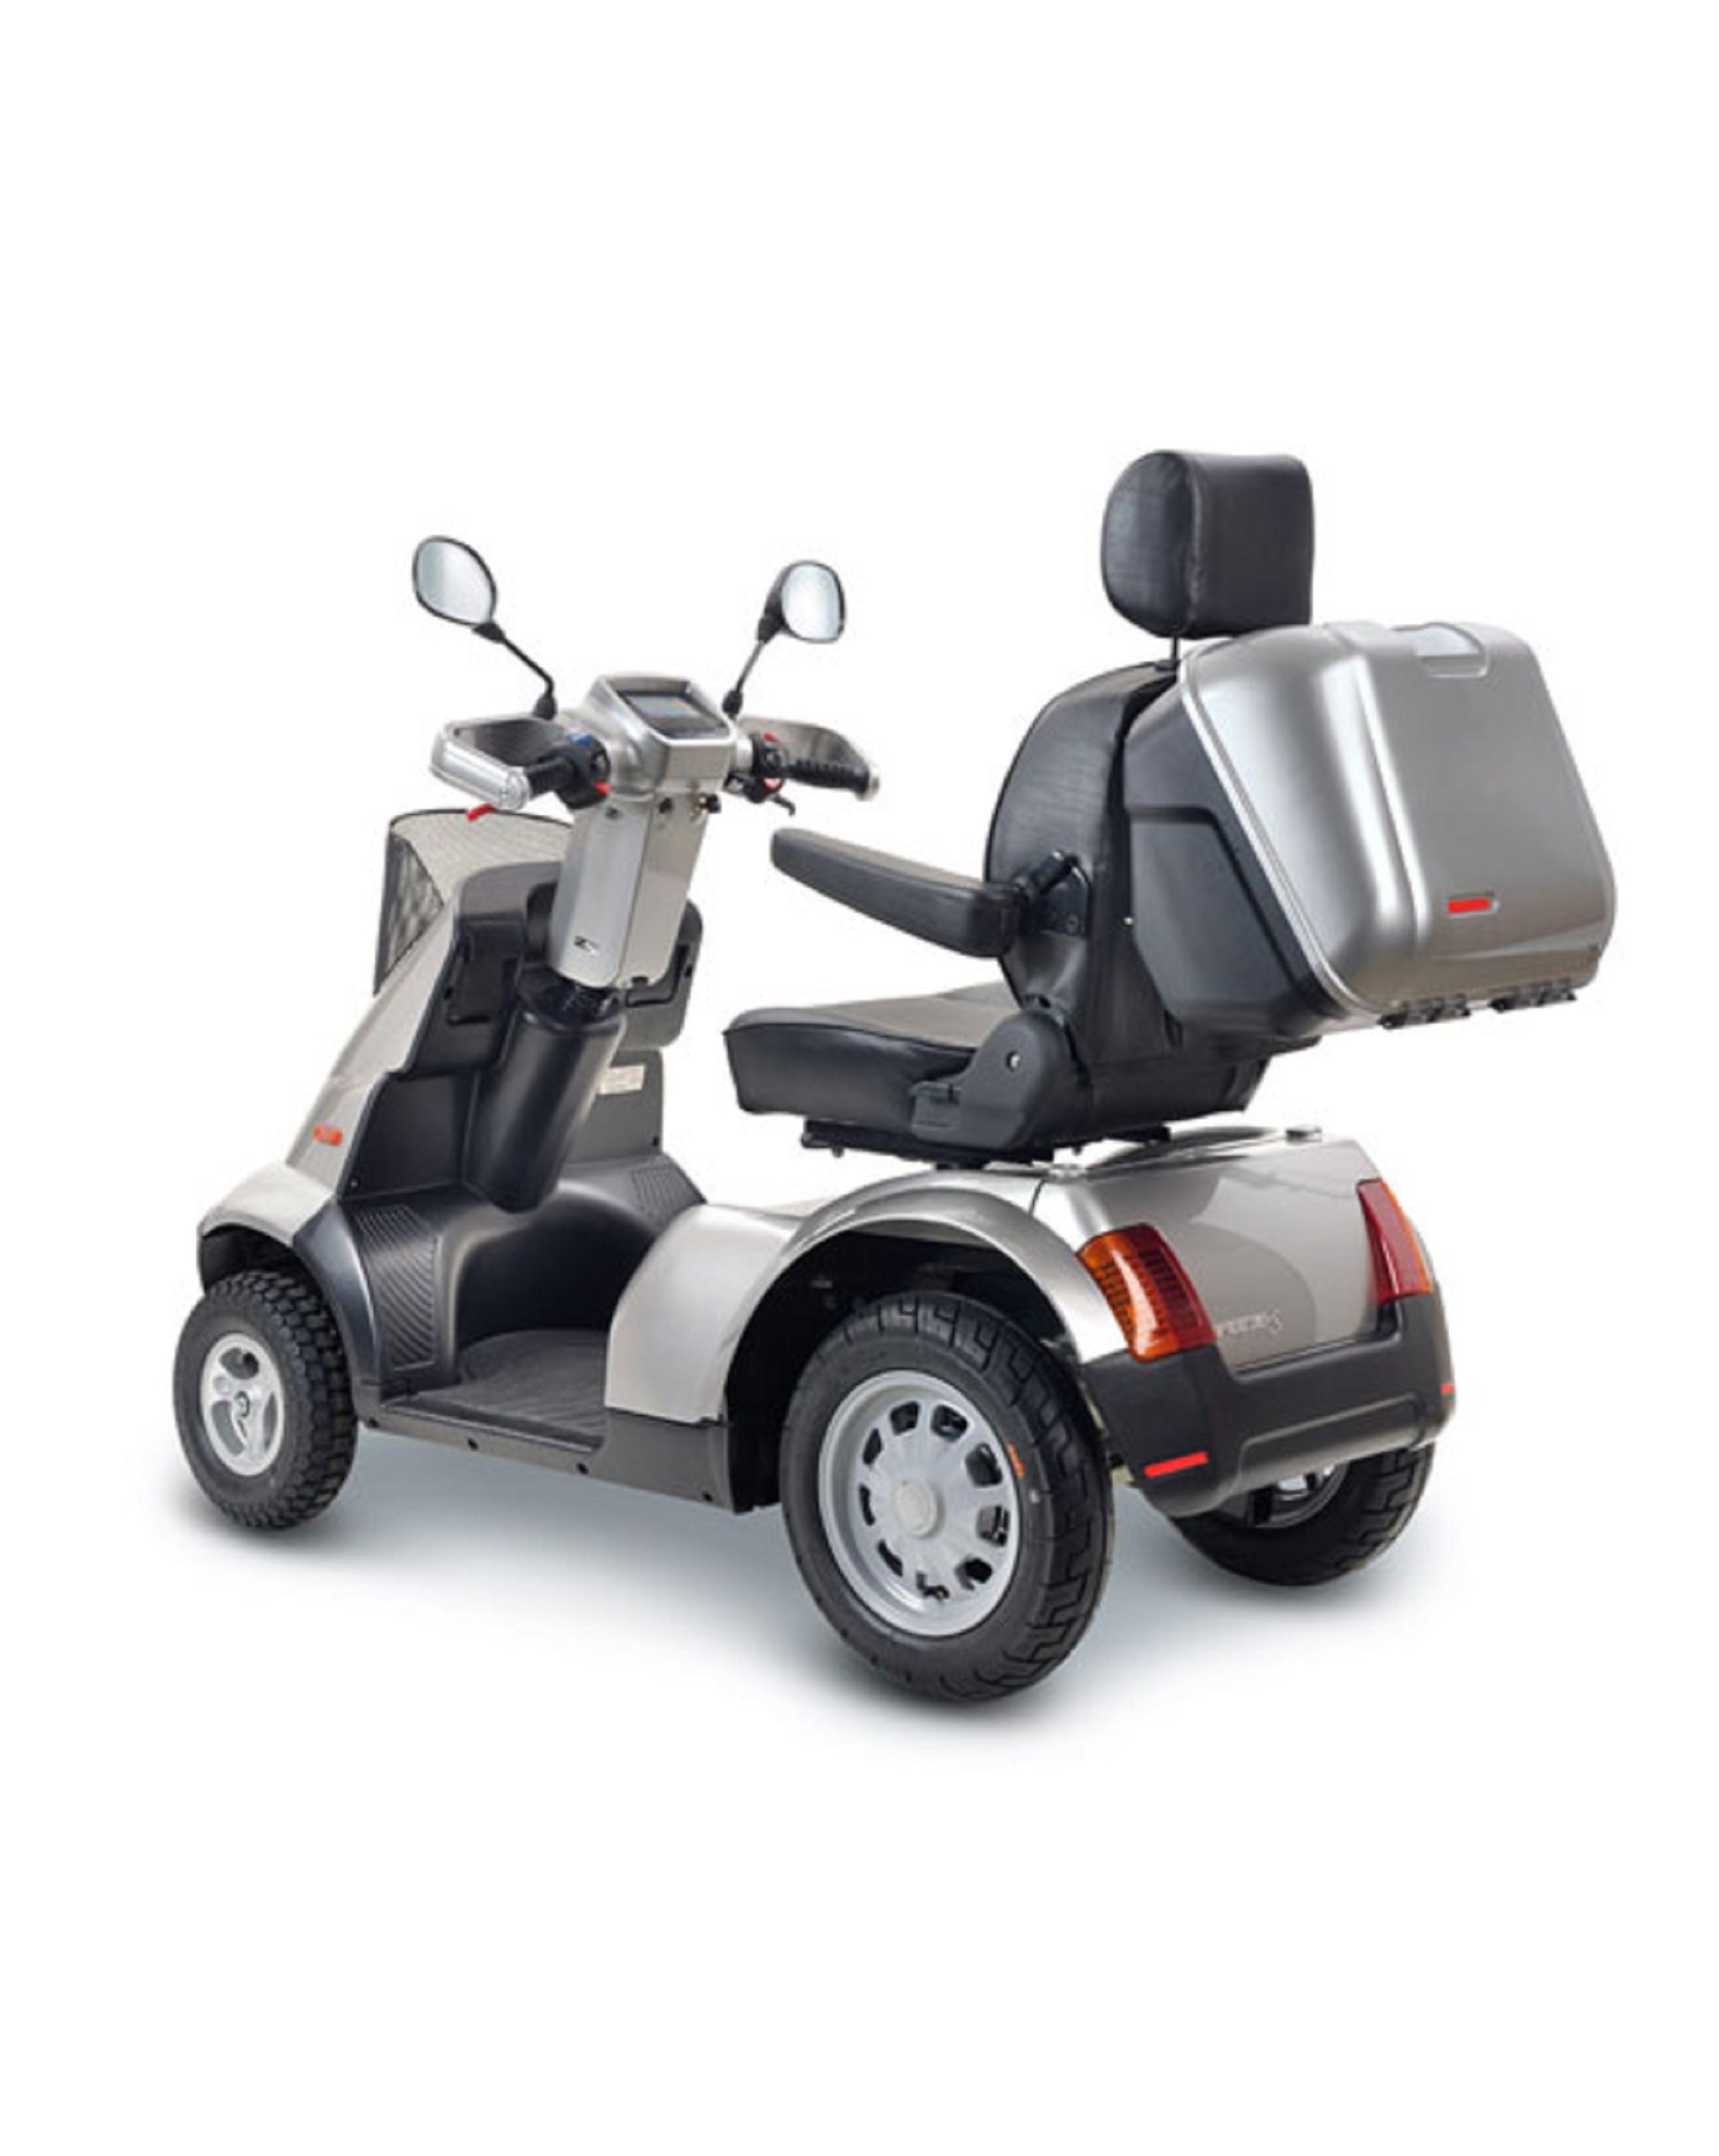 Afikim - Afiscooter S4 - Full Size Mobility Scooter - 4-Wheel - Metallic Silver